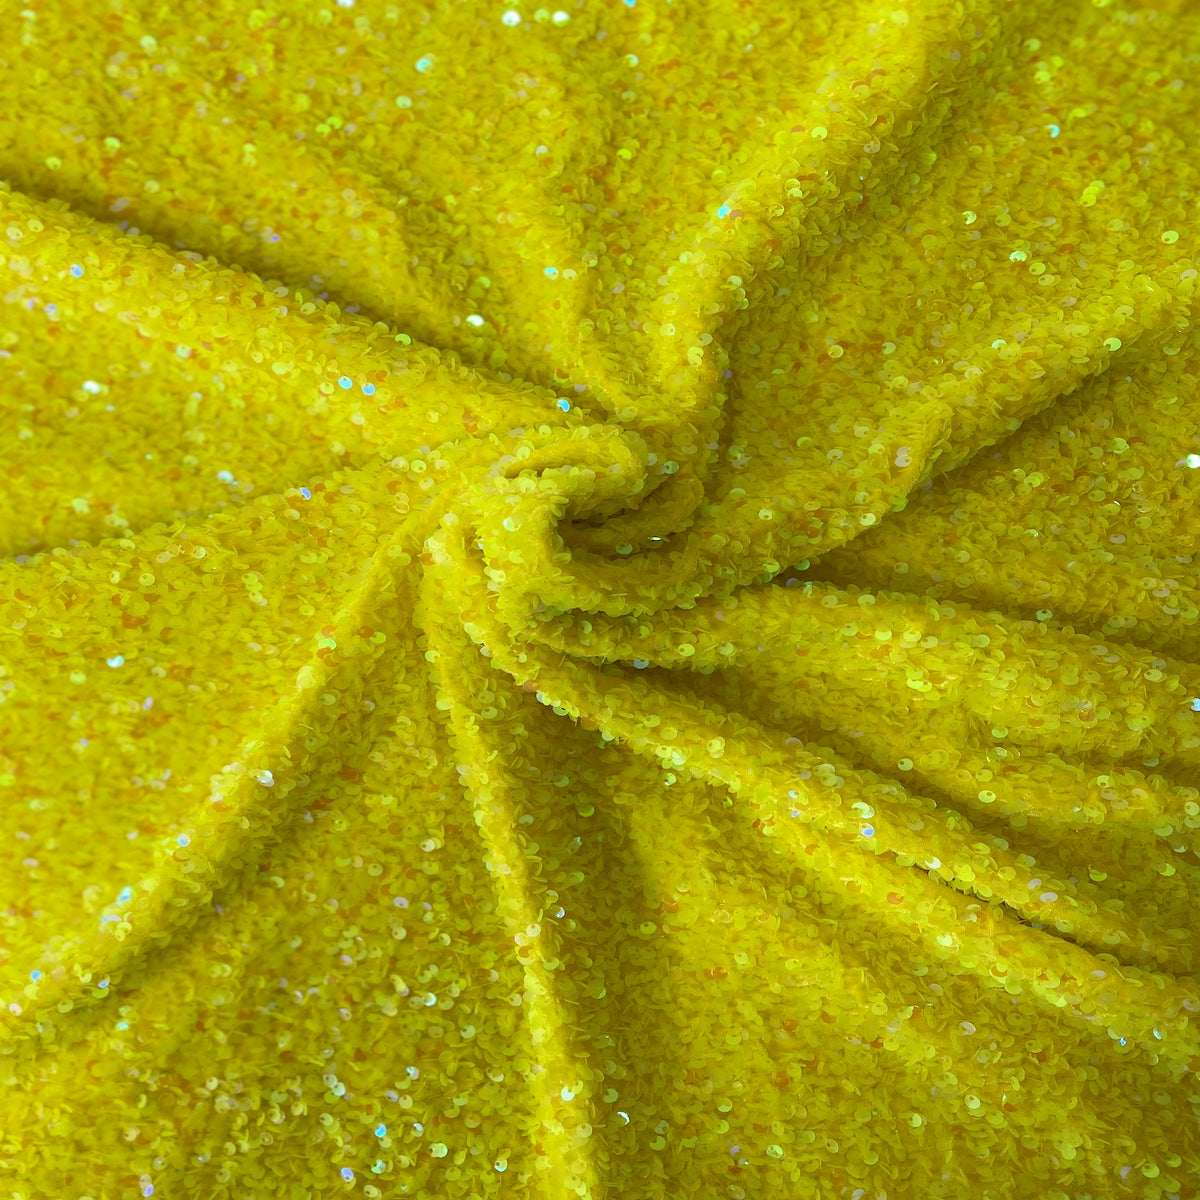 Yellow Iridescent Sequins Embroidered Stretch Velvet Rodeo Fabric - Fashion Fabrics LLC